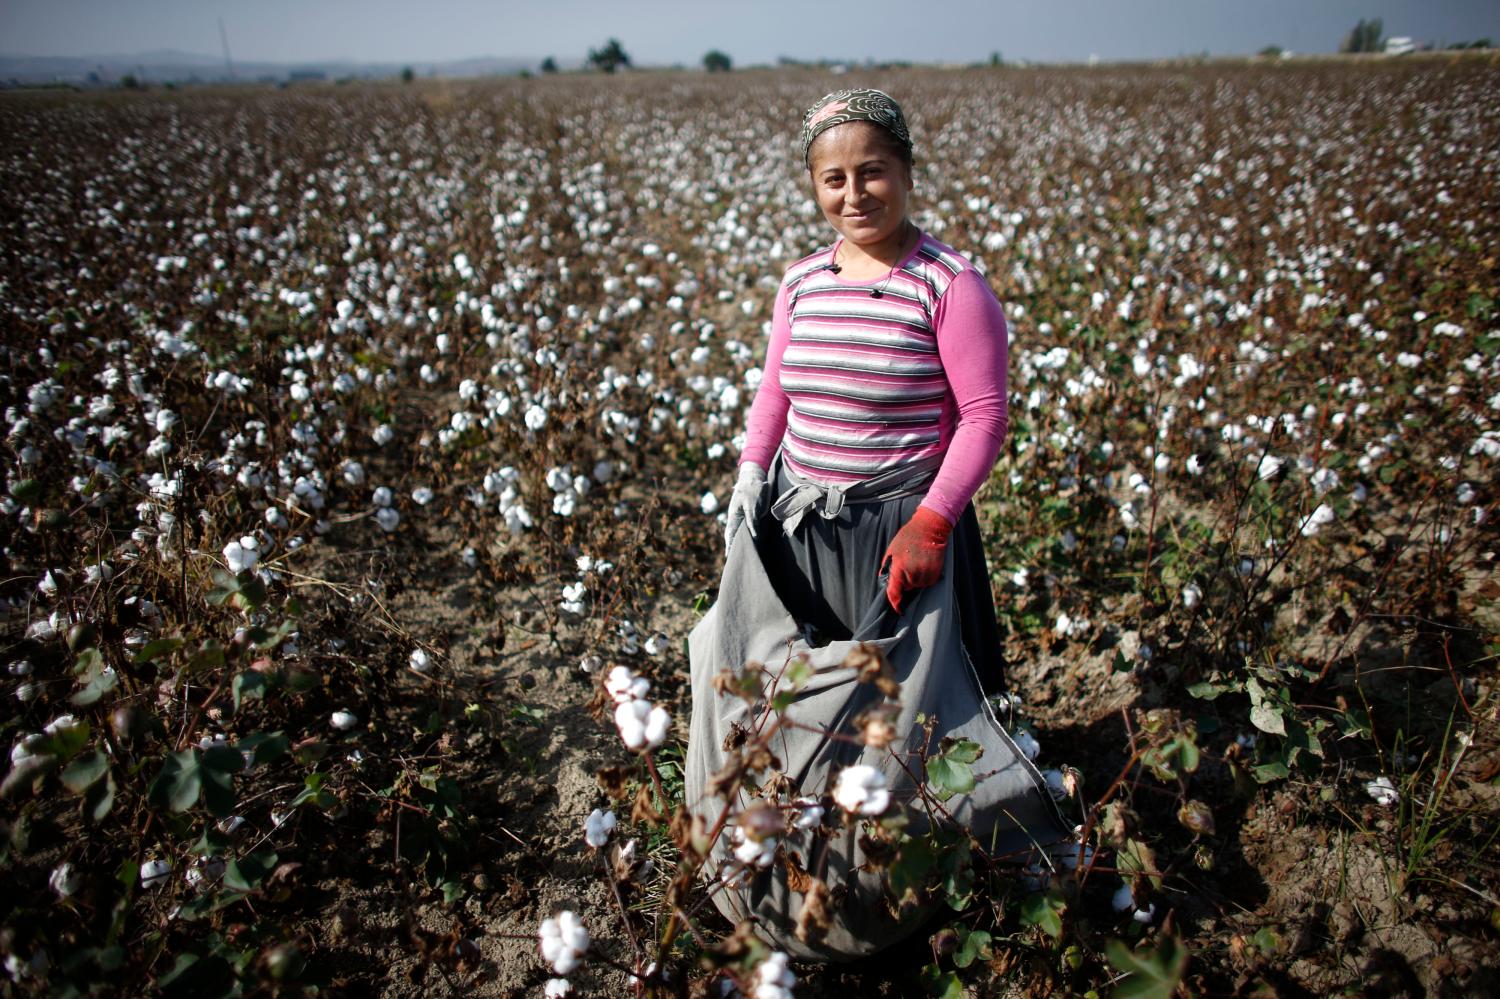 Turkish villager Sibel is pictured as she works in a cotton field near the border town of Reyhanli on the Turkish-Syrian border, in Hatay province, November 4, 2012. Despite the conflict on the Syrian side of the border, cotton harvest is still underway in Turkey's southern border province of Hatay. During early October, the Turkish military launched a retaliatory strike on Syria after a mortar bomb fired from Syrian soil landed in the countryside in Hatay. Some Syrian refugees work at cotton fields together with Turkish villagers in the border region as cottons pickers.  REUTERS/Murad Sezer (TURKEY - Tags: AGRICULTURE POLITICS)